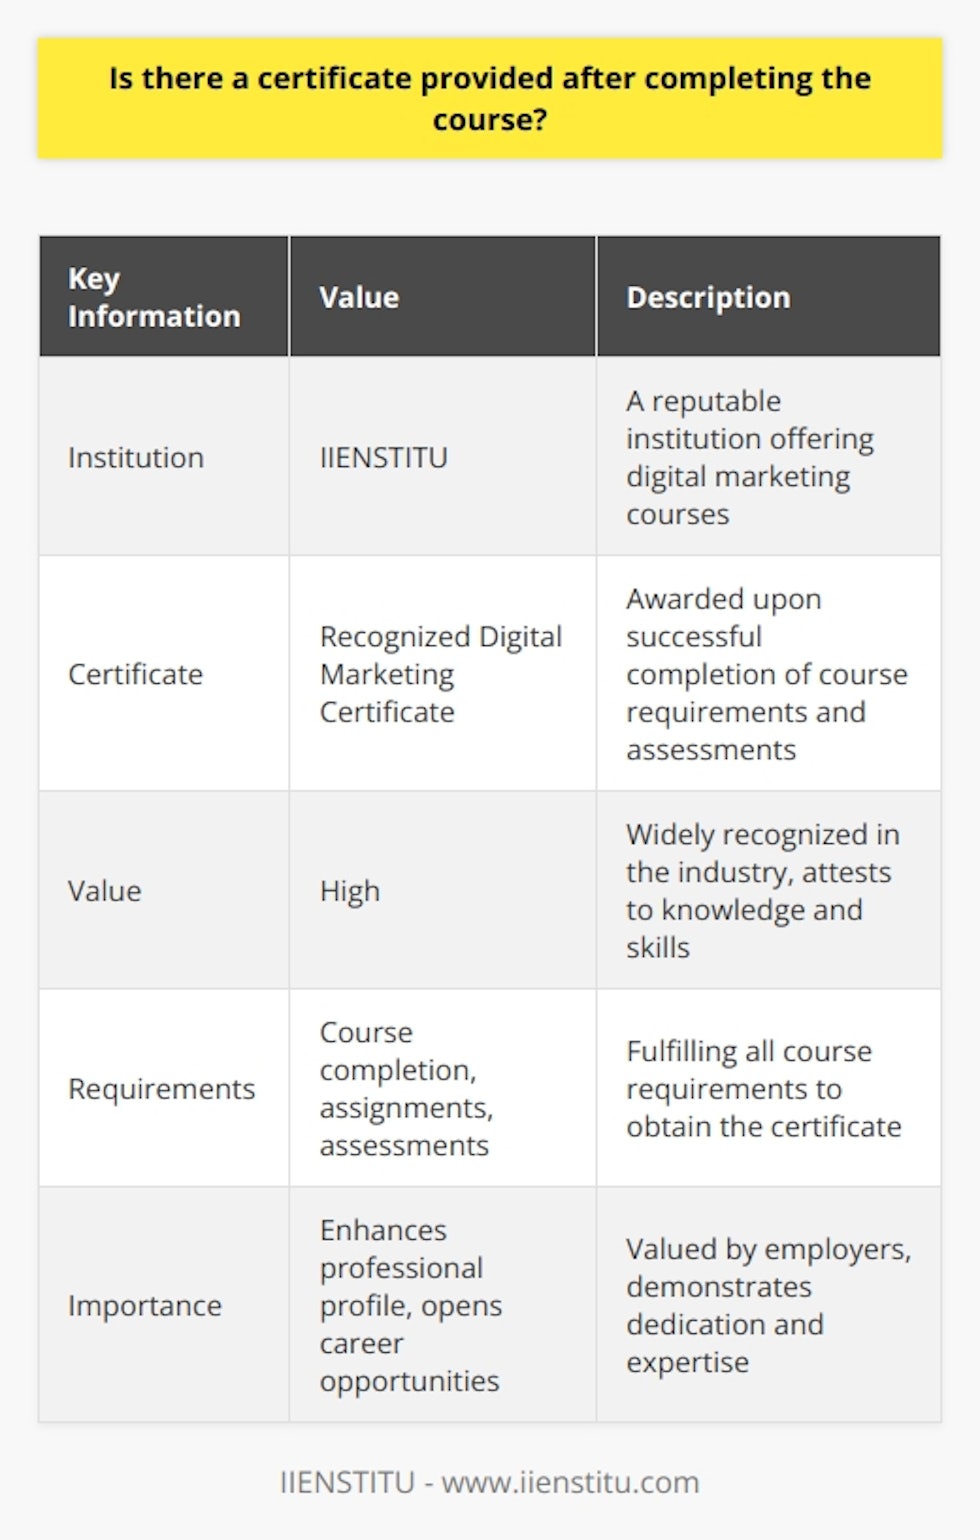 IIENSTITU is a reputable institution that offers comprehensive digital marketing courses. Upon successfully completing the course requirements and assessments, students are awarded a recognized digital marketing certificate. This certificate serves as proof of their knowledge and skills in the field of digital marketing.The certificate provided by IIENSTITU holds great value and is widely recognized in the industry. It attests to the student's dedication, commitment, and ability to effectively navigate the digital marketing landscape. Having this certification not only enhances one's professional profile but also opens up various opportunities for career advancement and growth.To obtain the certificate, students must fulfill all the requirements of the course, which may include attending classes, completing assignments, participating in discussions, and passing assessments. IIENSTITU ensures that the content covered in their digital marketing courses is comprehensive and up-to-date, providing students with a strong foundation in various aspects of digital marketing.The digital marketing certificate from IIENSTITU is a rare and valuable recognition. It sets individuals apart from the competition and demonstrates their expertise in the field. Employers often see this certificate as a testament to the candidate's dedication and commitment to professional development.IIENSTITU's digital marketing certificate is well-regarded in the industry due to the institution's commitment to delivering high-quality education and staying up-to-date with the ever-evolving digital marketing landscape. The rigorous coursework and assessments ensure that students gain practical knowledge and skills that can be applied in real-life scenarios.In conclusion, upon successful completion of a digital marketing course at IIENSTITU, students receive a recognized digital marketing certificate. This certificate holds great value in the industry and serves as proof of their knowledge and skills in the field of digital marketing. Investing in a digital marketing course at IIENSTITU can greatly enhance one's professional profile and open doors to exciting career opportunities.